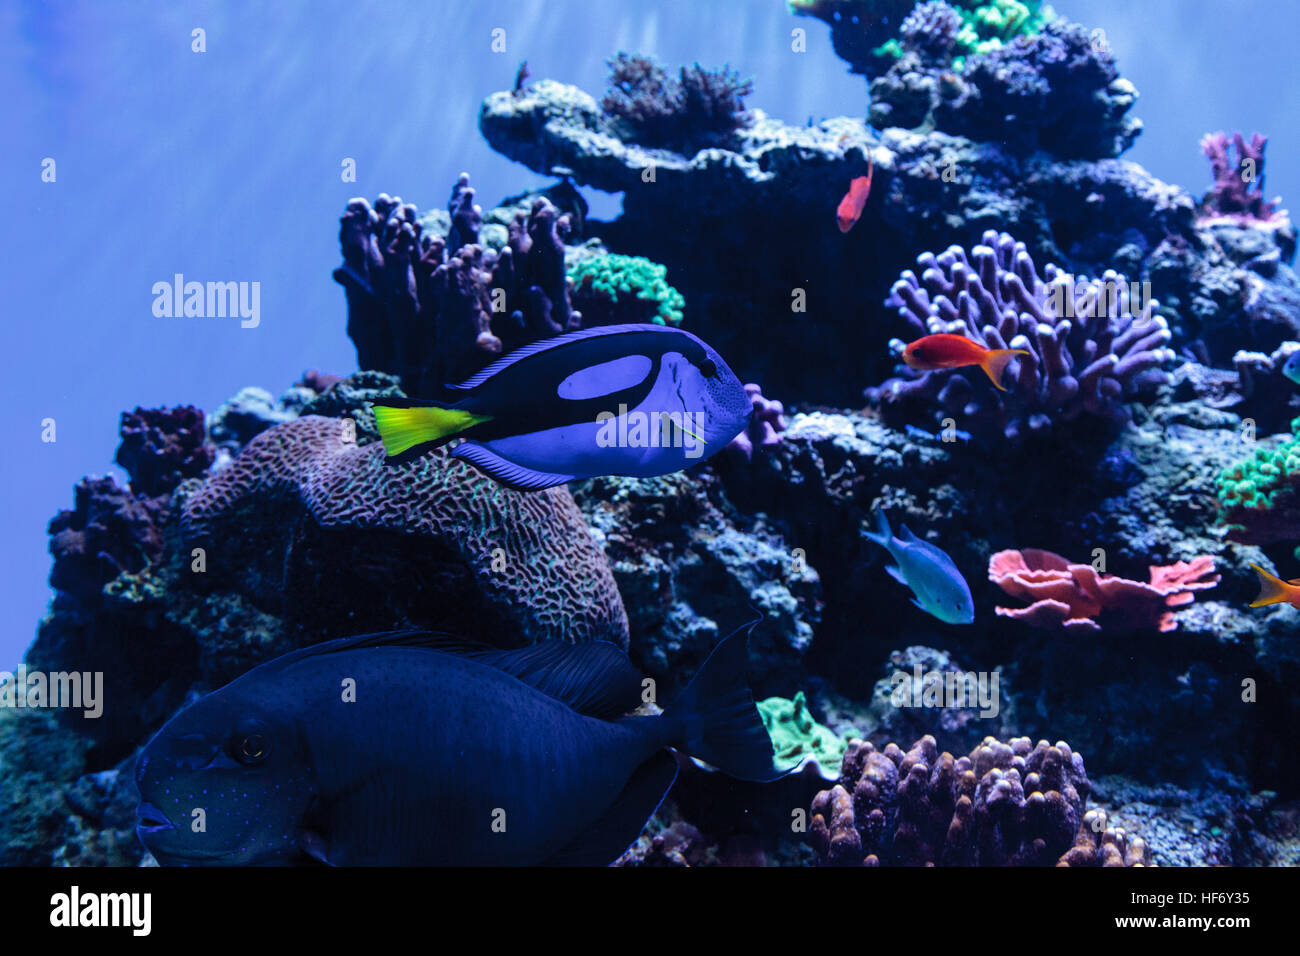 Palette tang fish, Paracanthurus hepatus, is also called the royal blue tang and can be found on a tropical reef in the ocean. Stock Photo